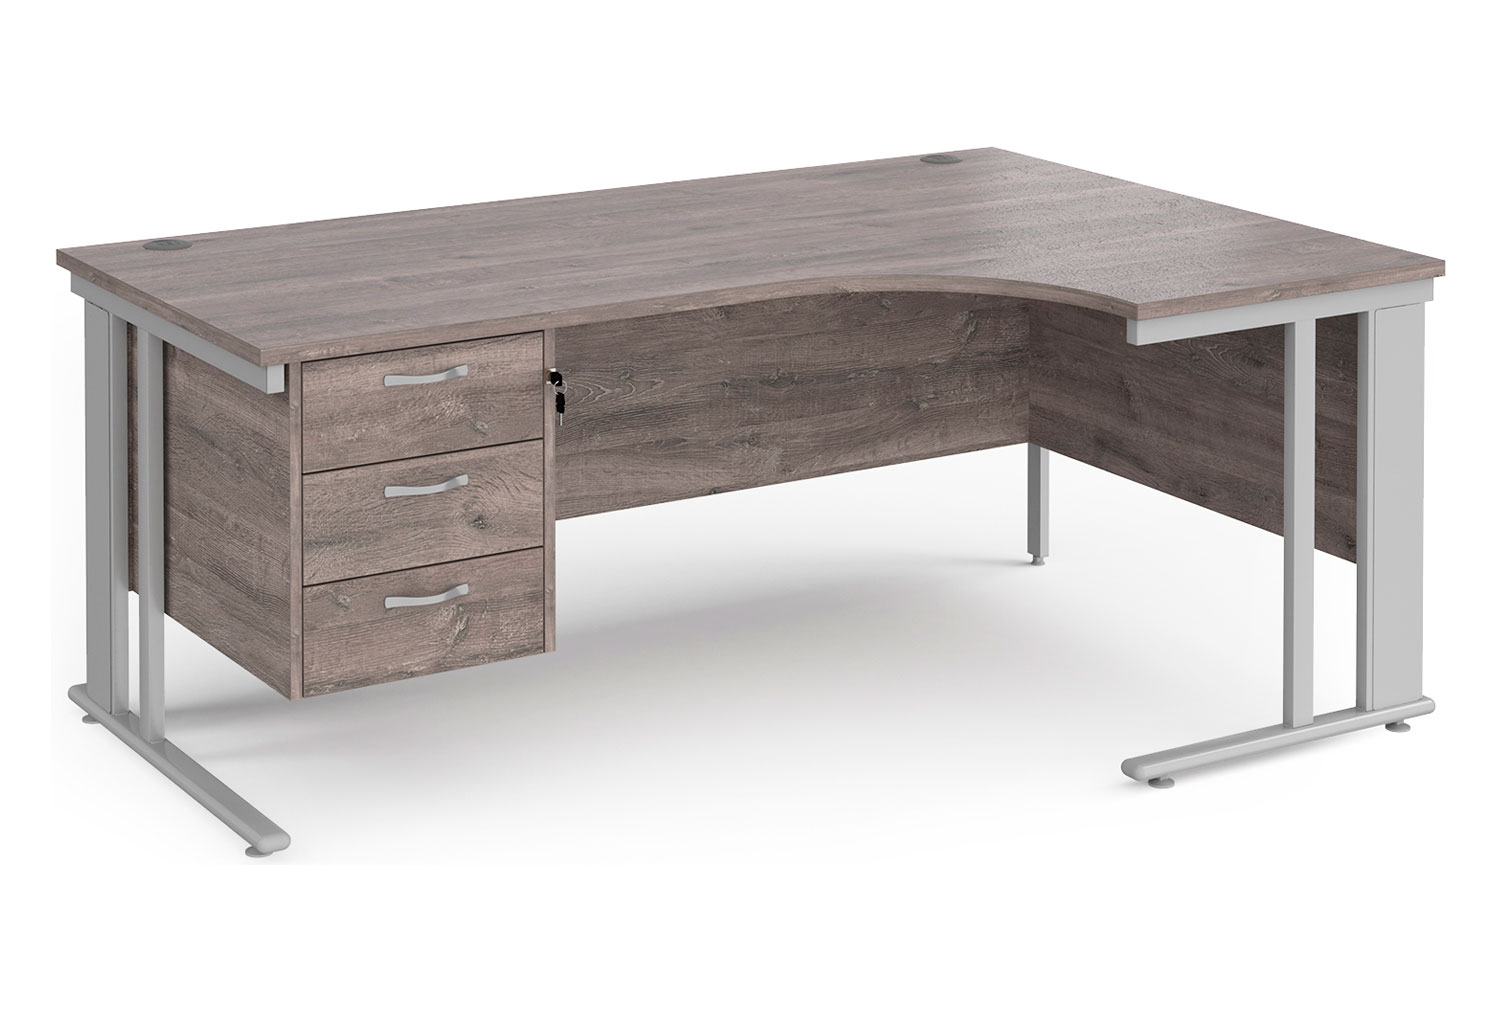 Value Line Deluxe Cable Managed Right Hand Ergo Office Desk 3 Drawers (Silver Legs), 180wx80dx73h (cm), Grey Oak